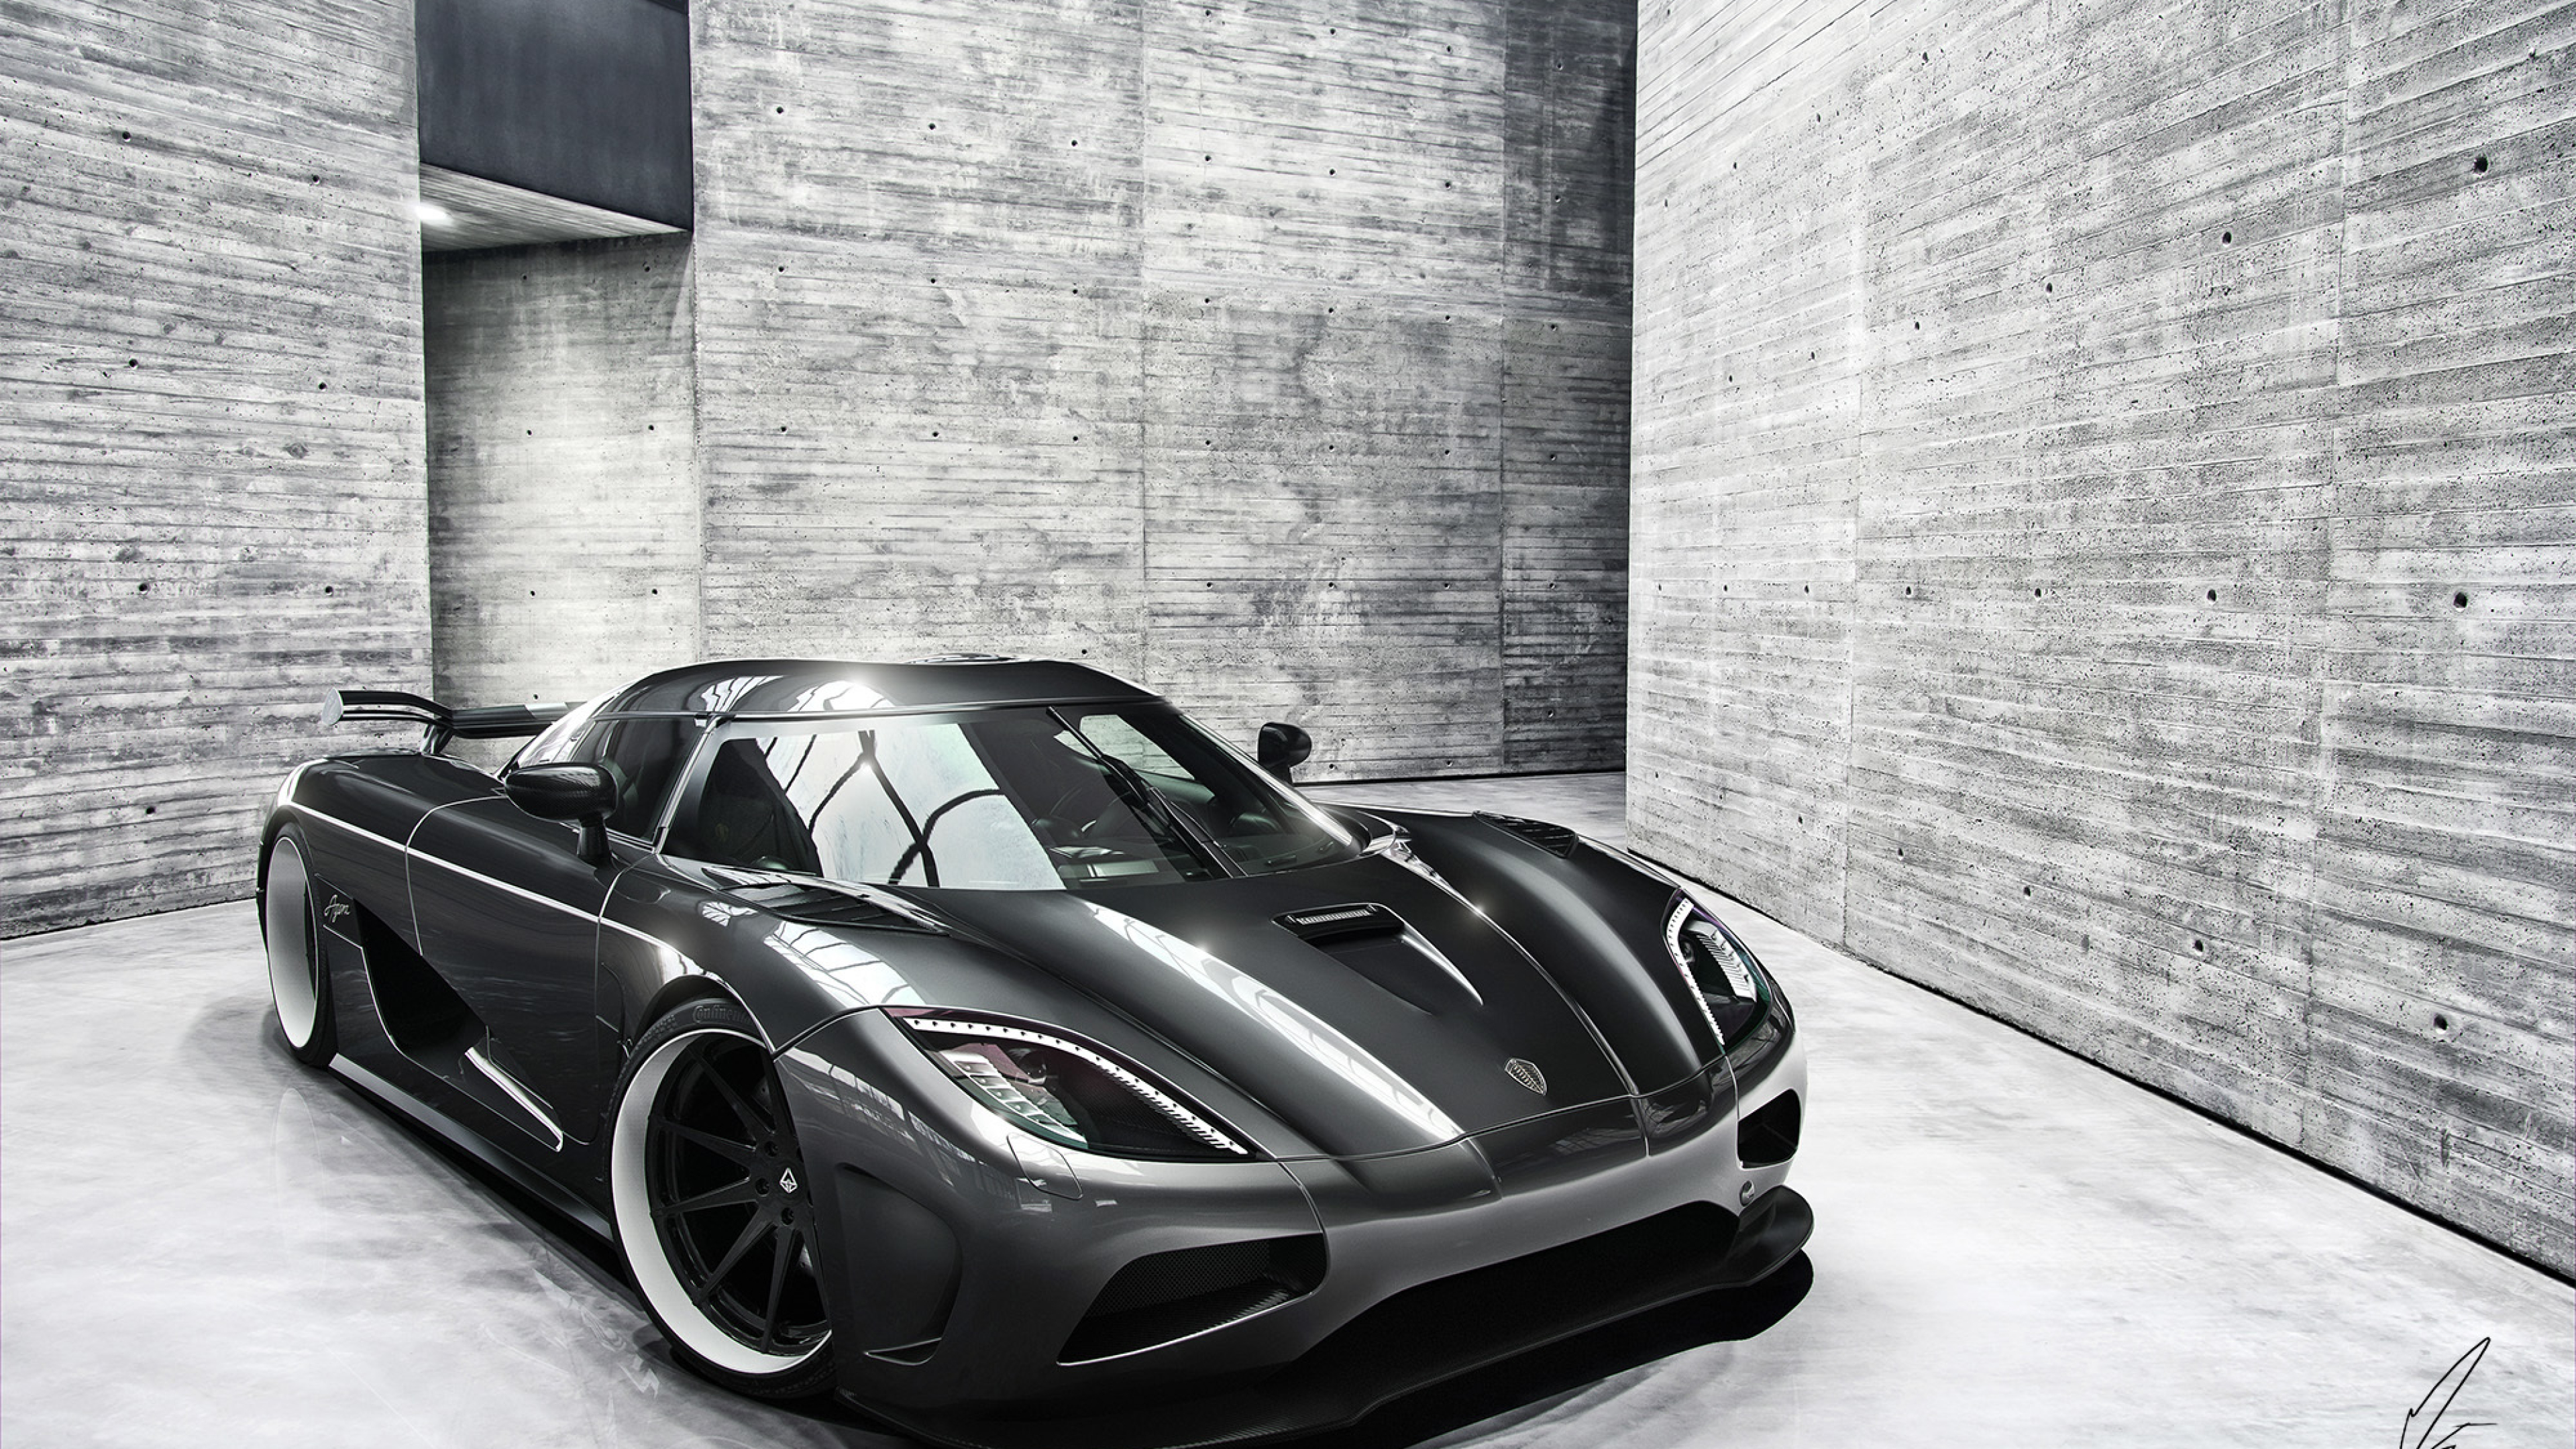 3840x2160 Koenigsegg Agera Supercar 4k Wallpaper Hd Cars 4k Wallpapers Images Photos And Background Wallpapers Den